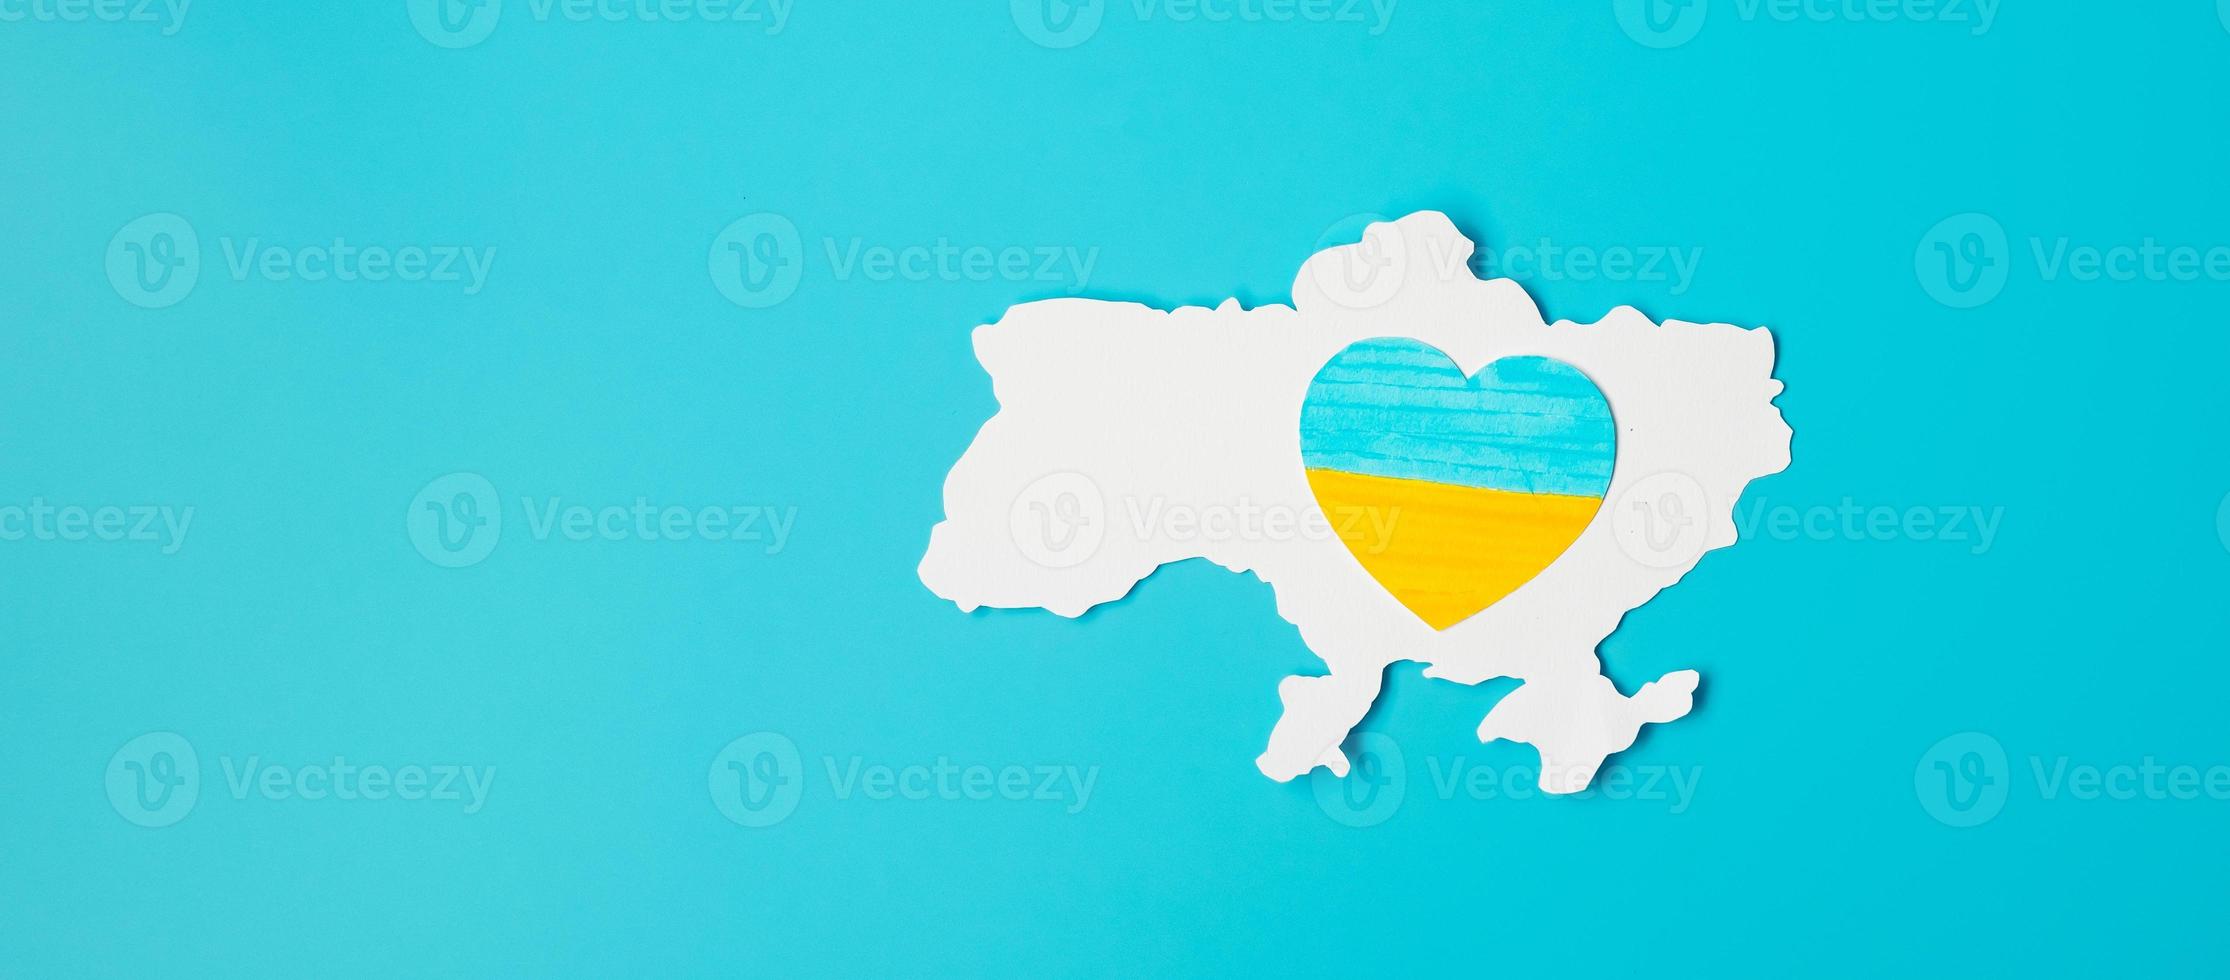 Support for Ukraine in the war with Russia, symbol of Heart with flag of Ukraine. Pray, No war, stop war and  stand with Ukraine photo